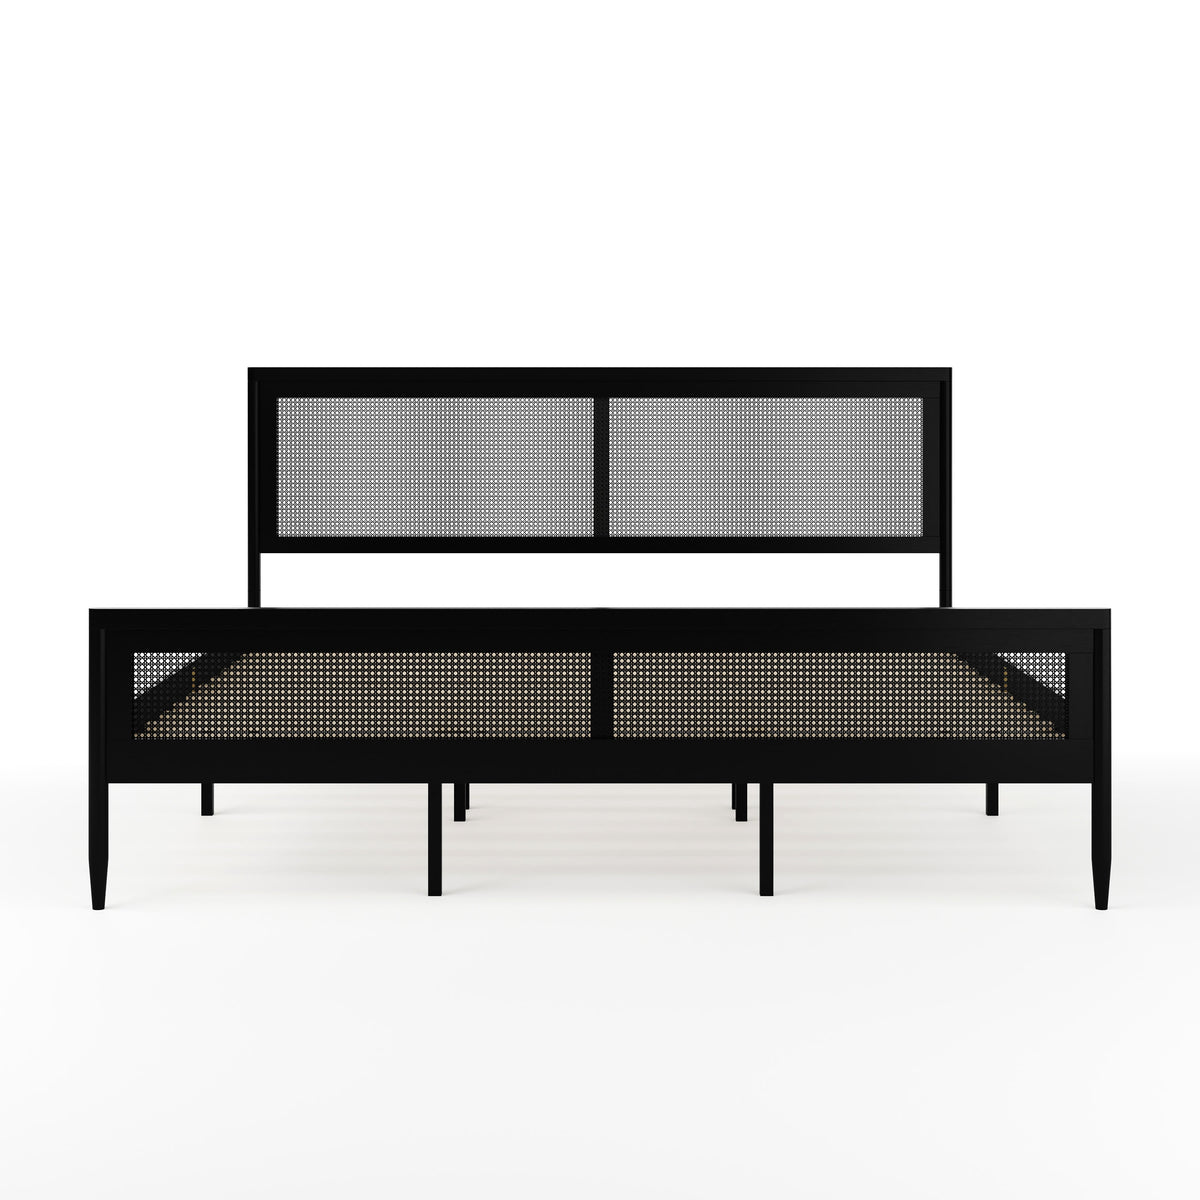 Black,King |#| Wooden King Platform Bed with Rattan Inset Headboard and Footboard-Black